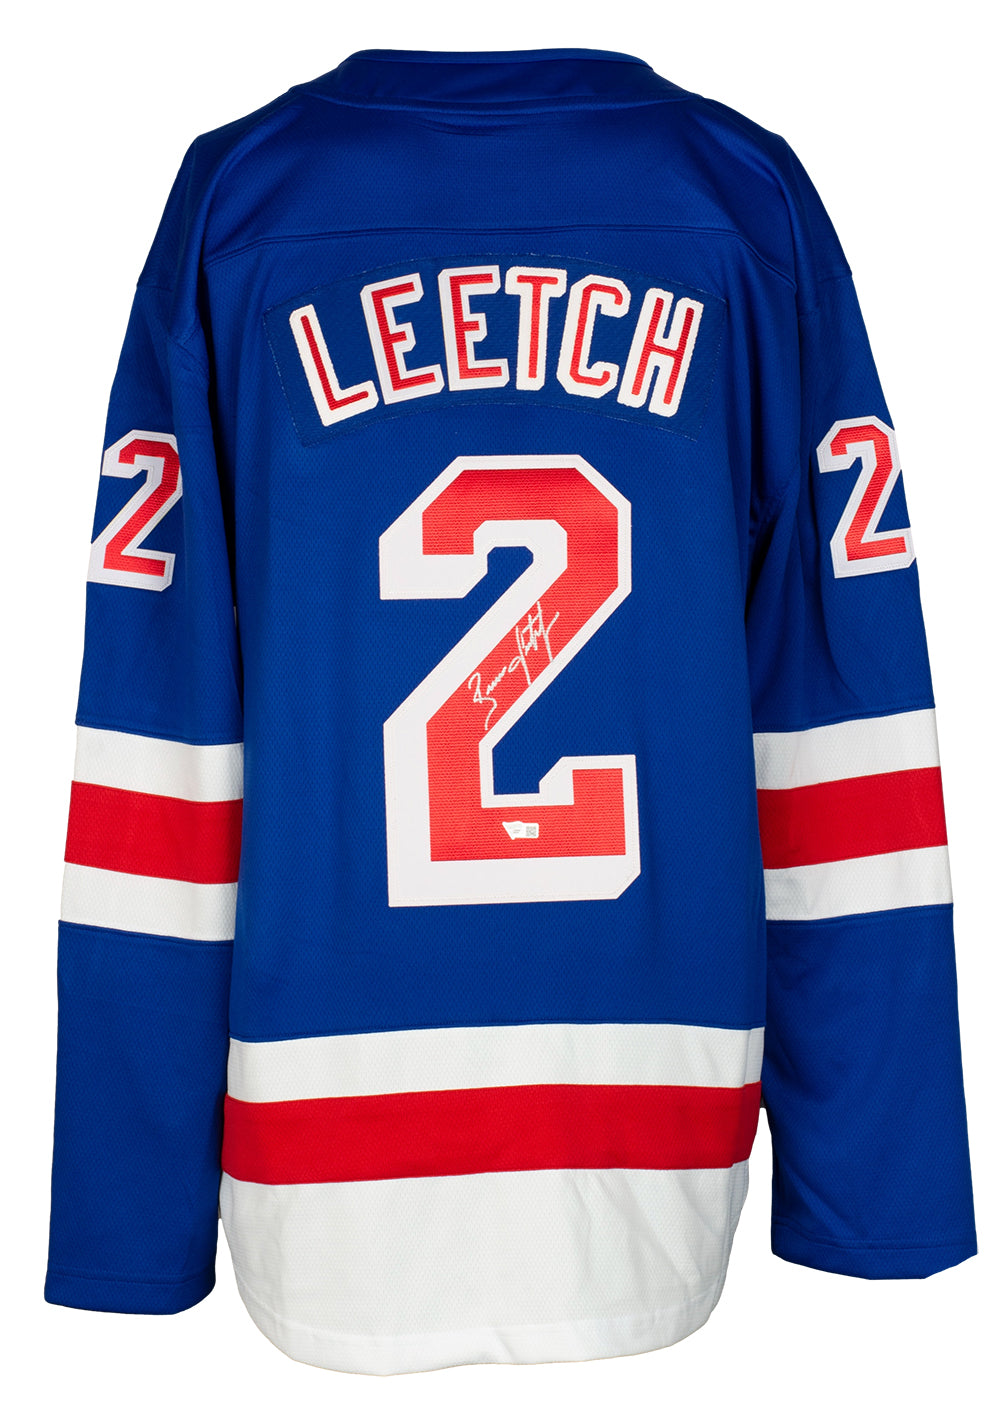 New York Rangers Brian Leetch Collectibles, Rangers Brian Leetch Memorabilia,  New York Rangers Brian Leetch Autographed Memorabilia